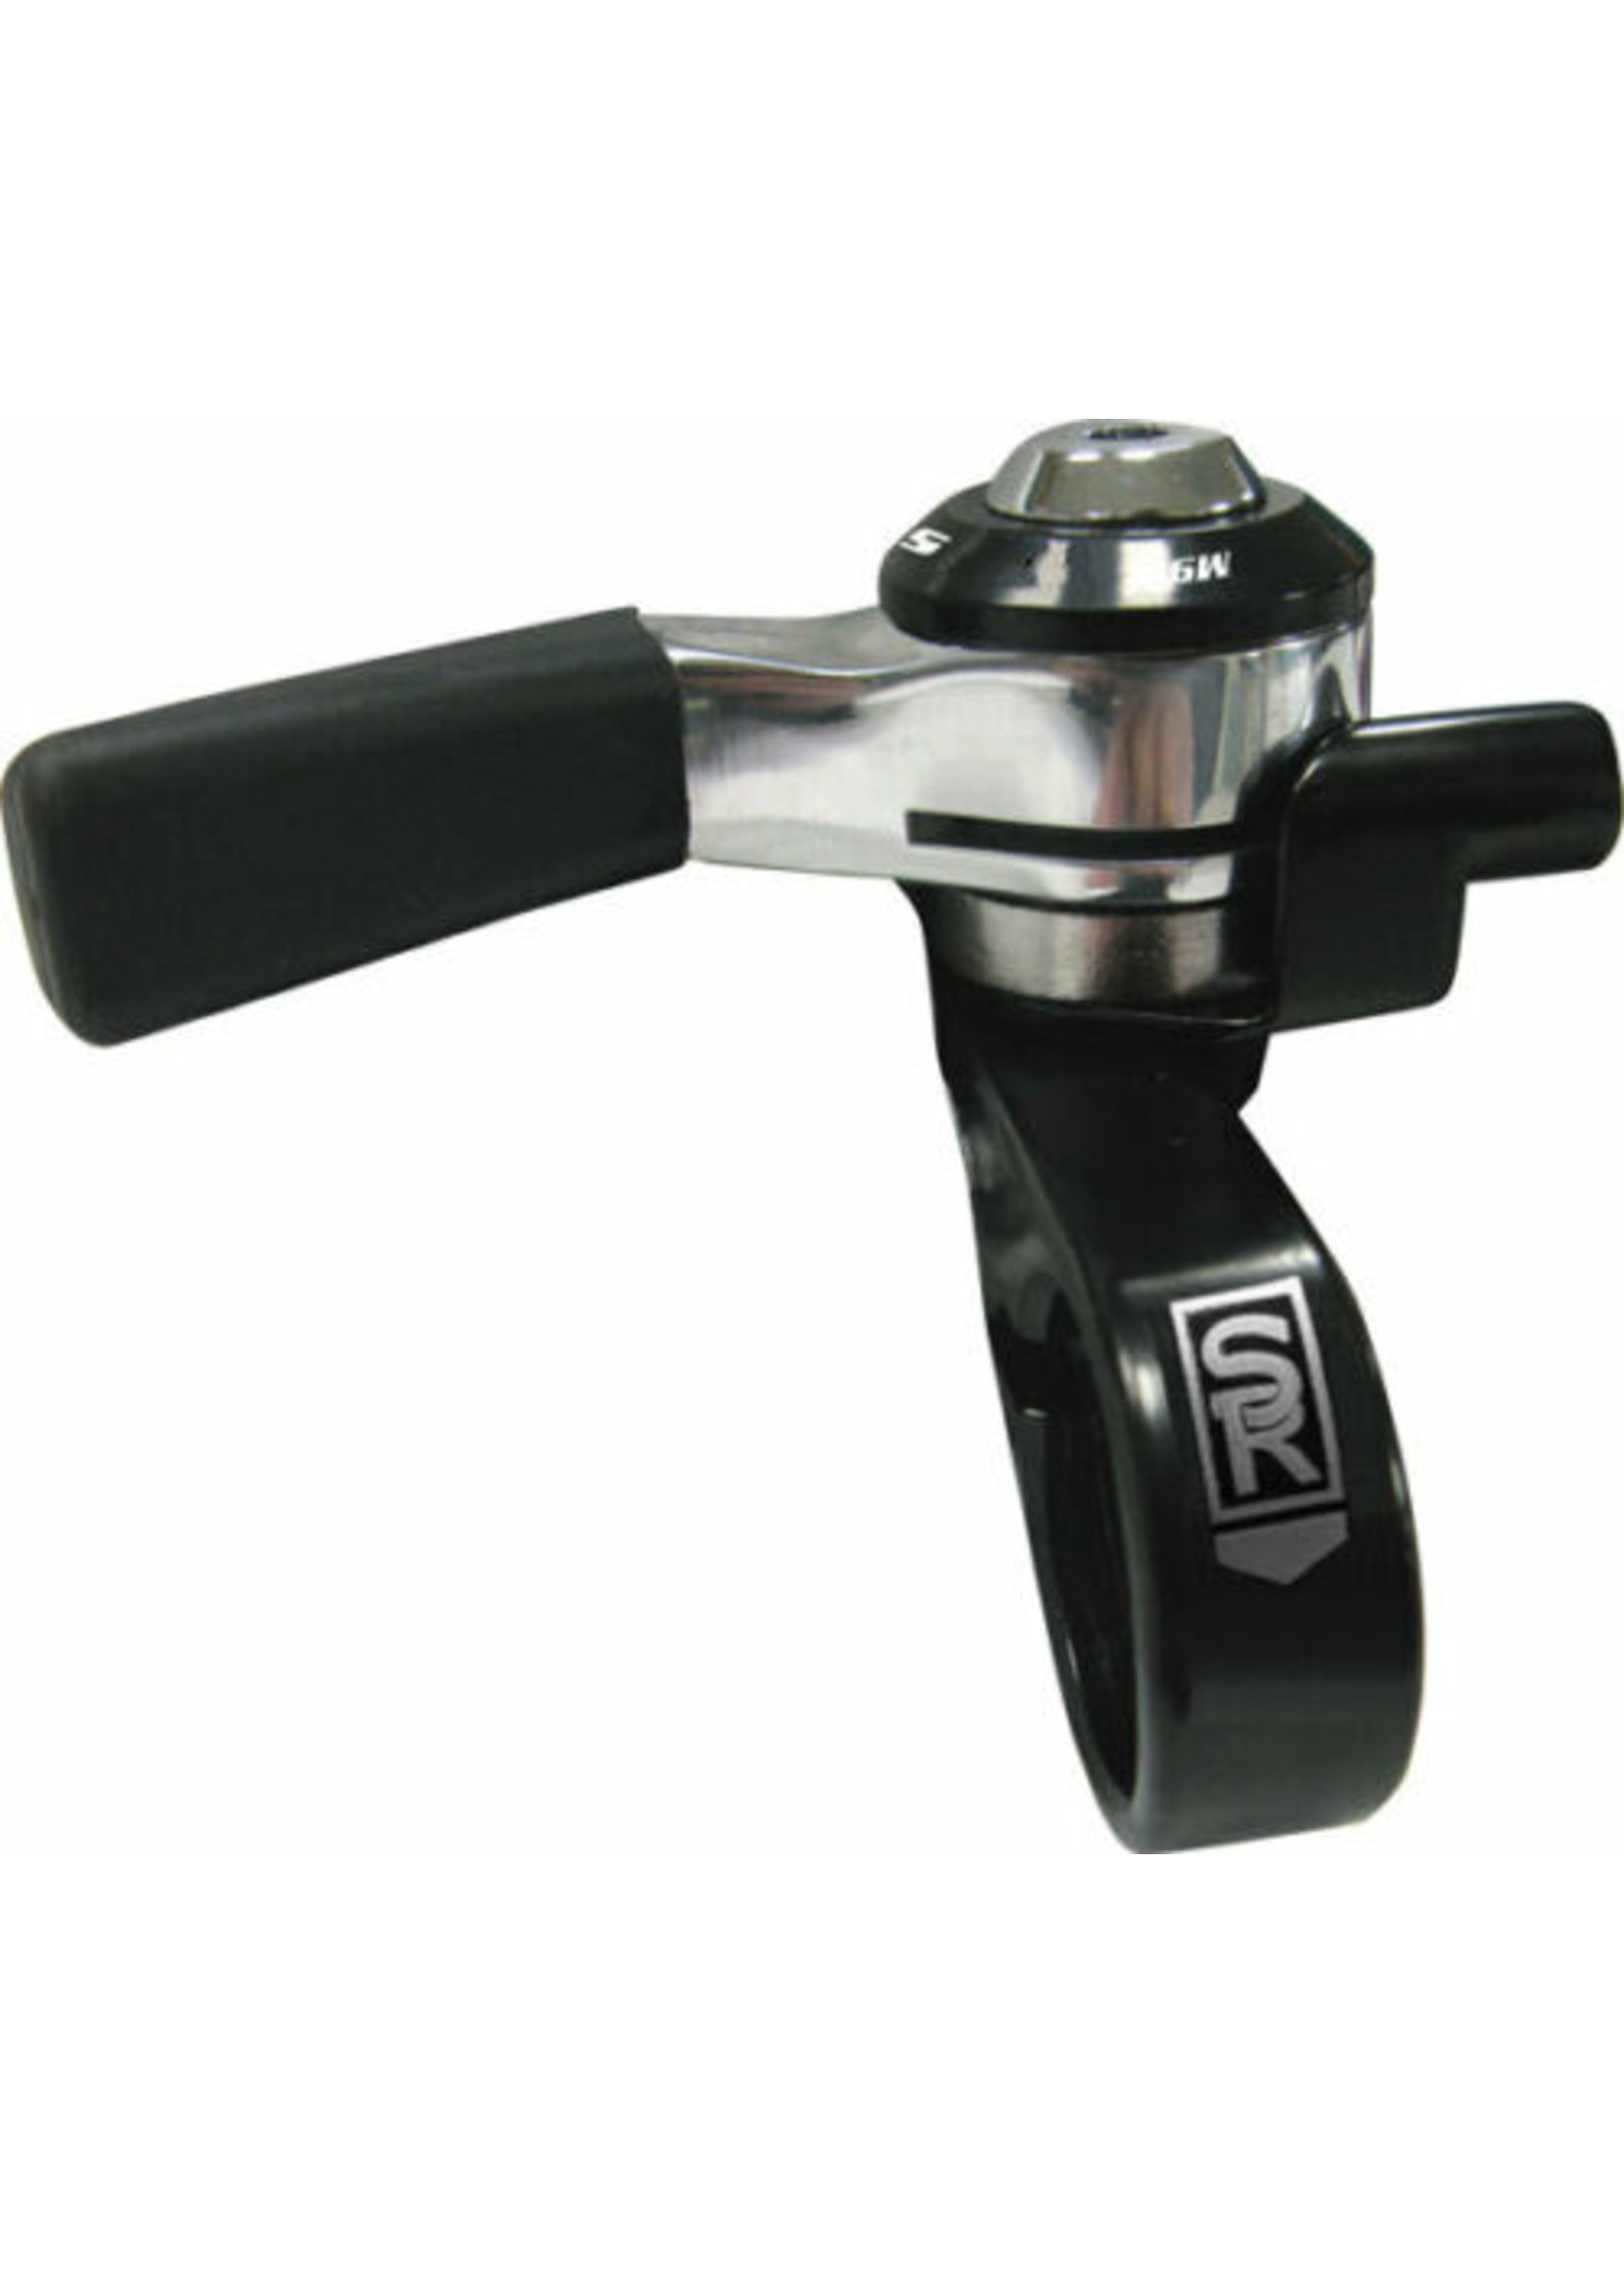 SUNRACE SLM96 3 SPEED THUMB FRICTION SHIFTER